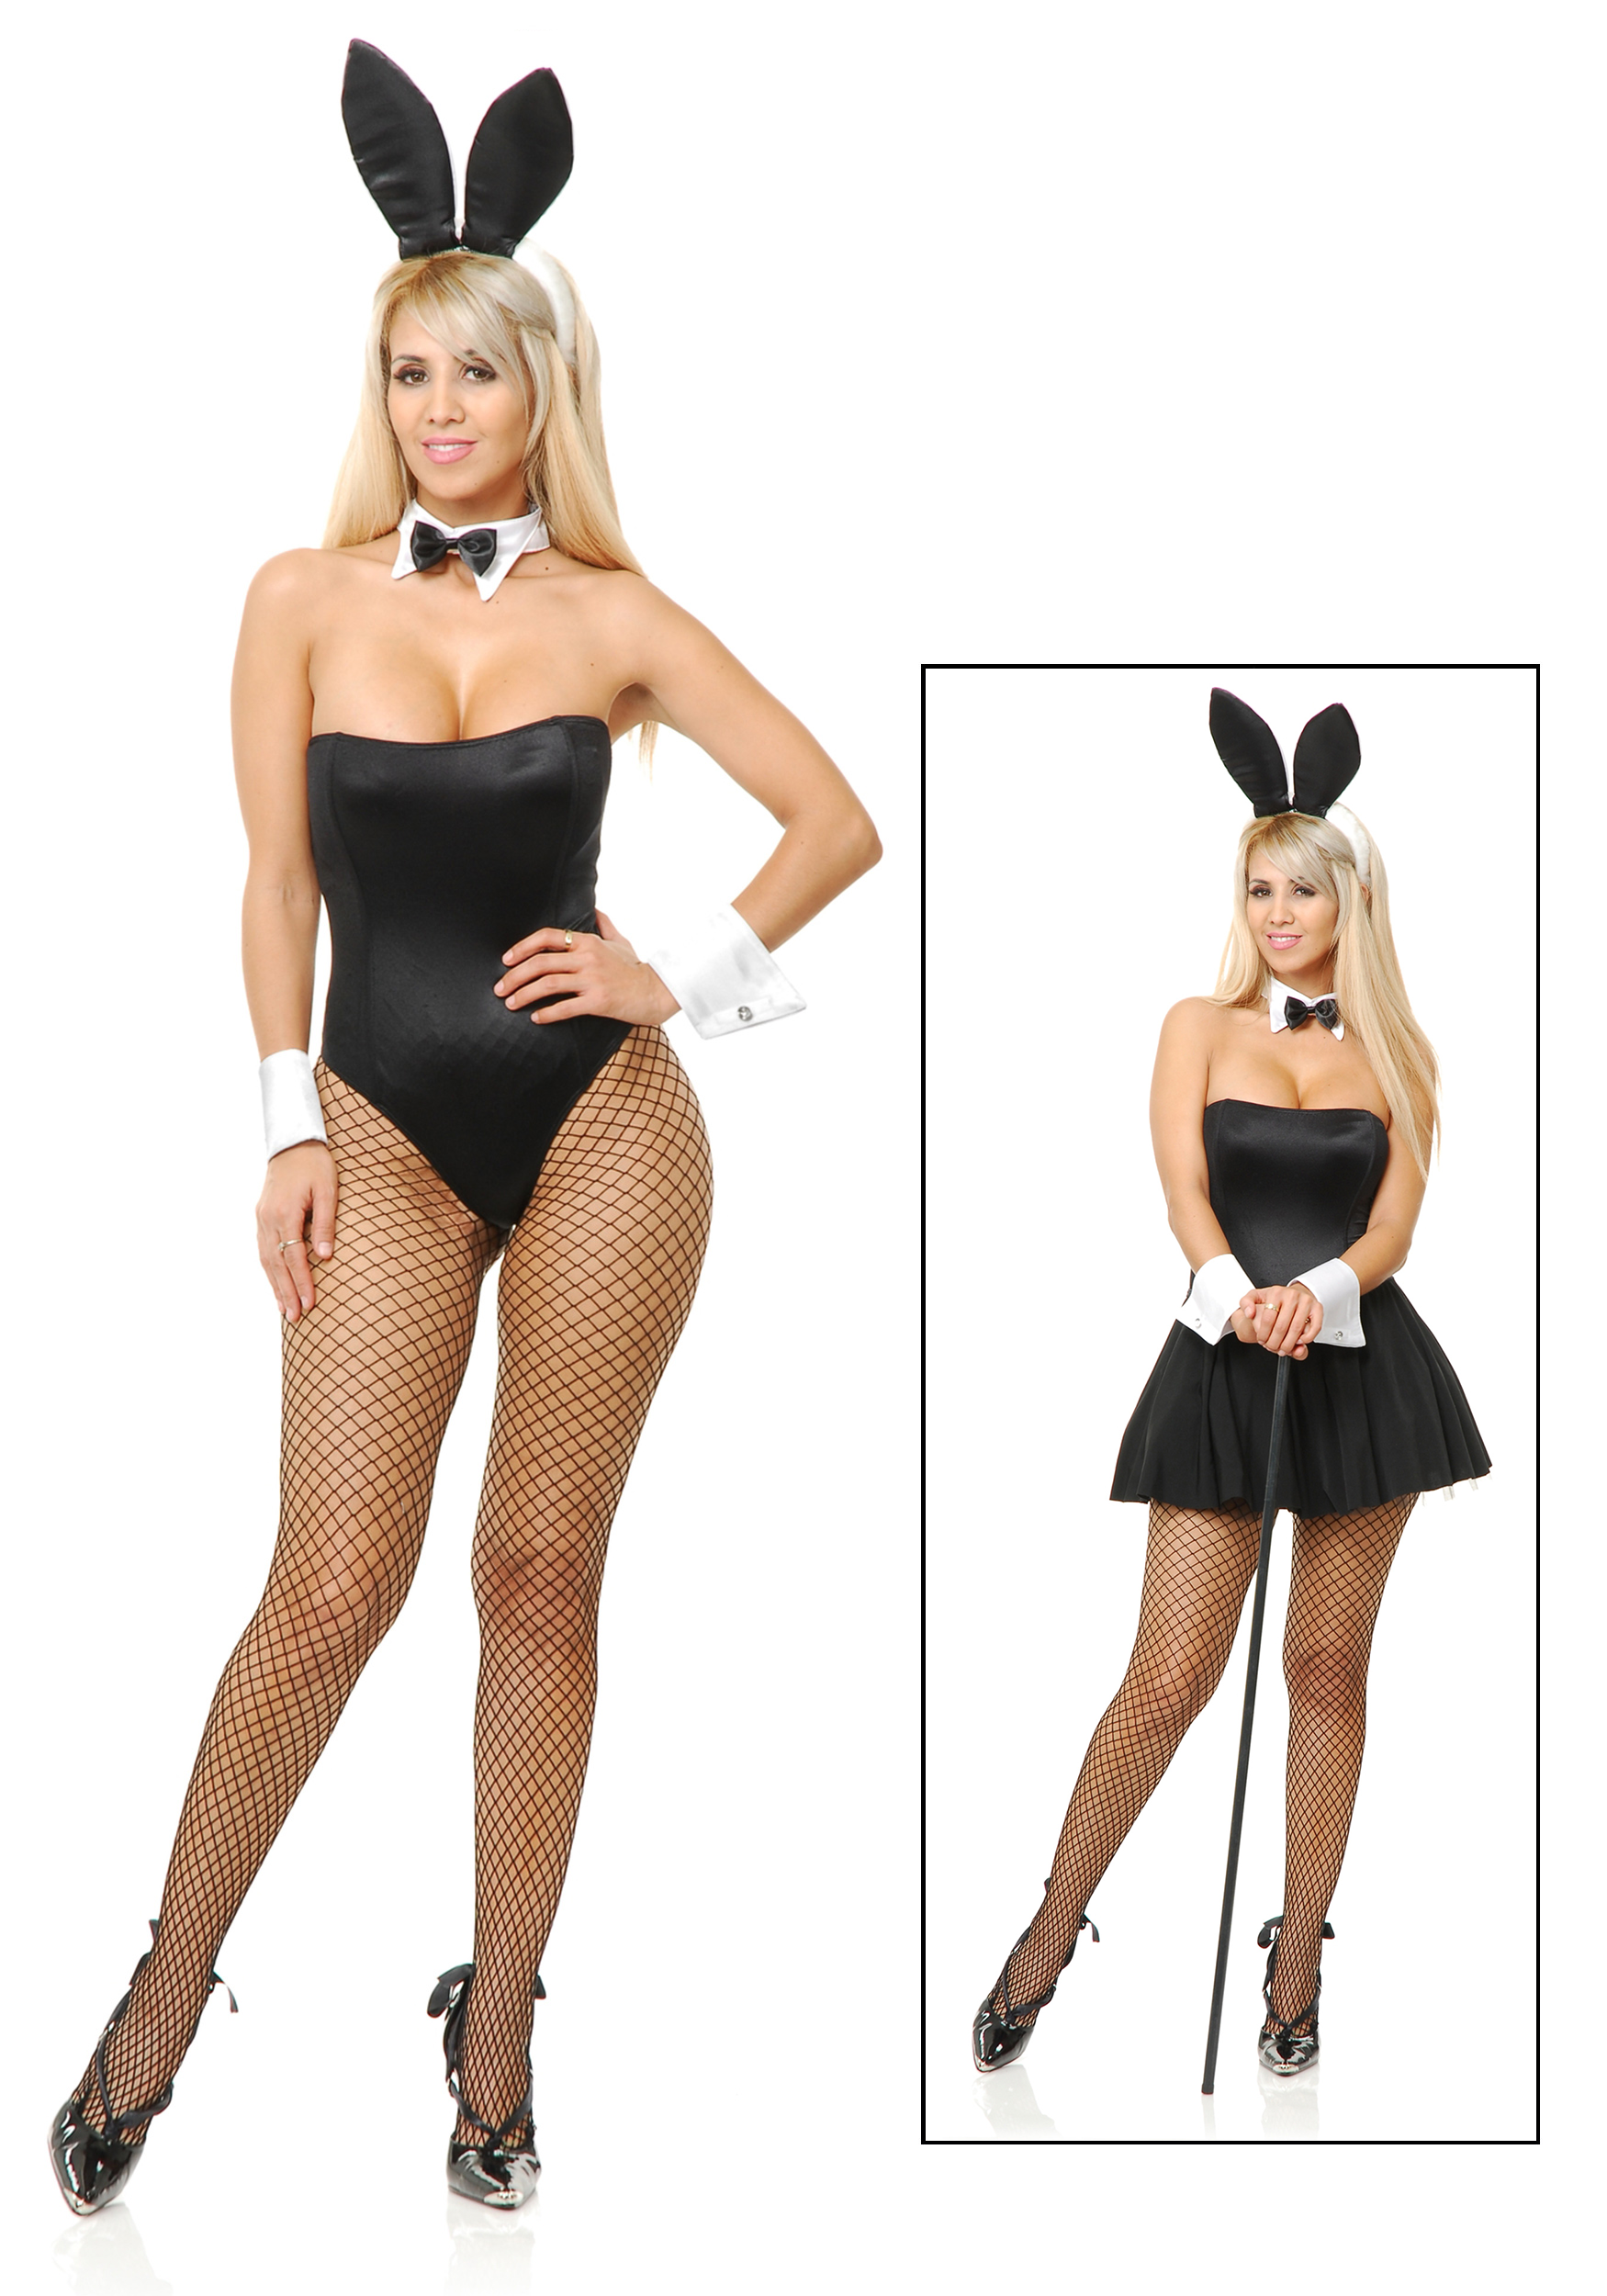 Naked women in bunny costume